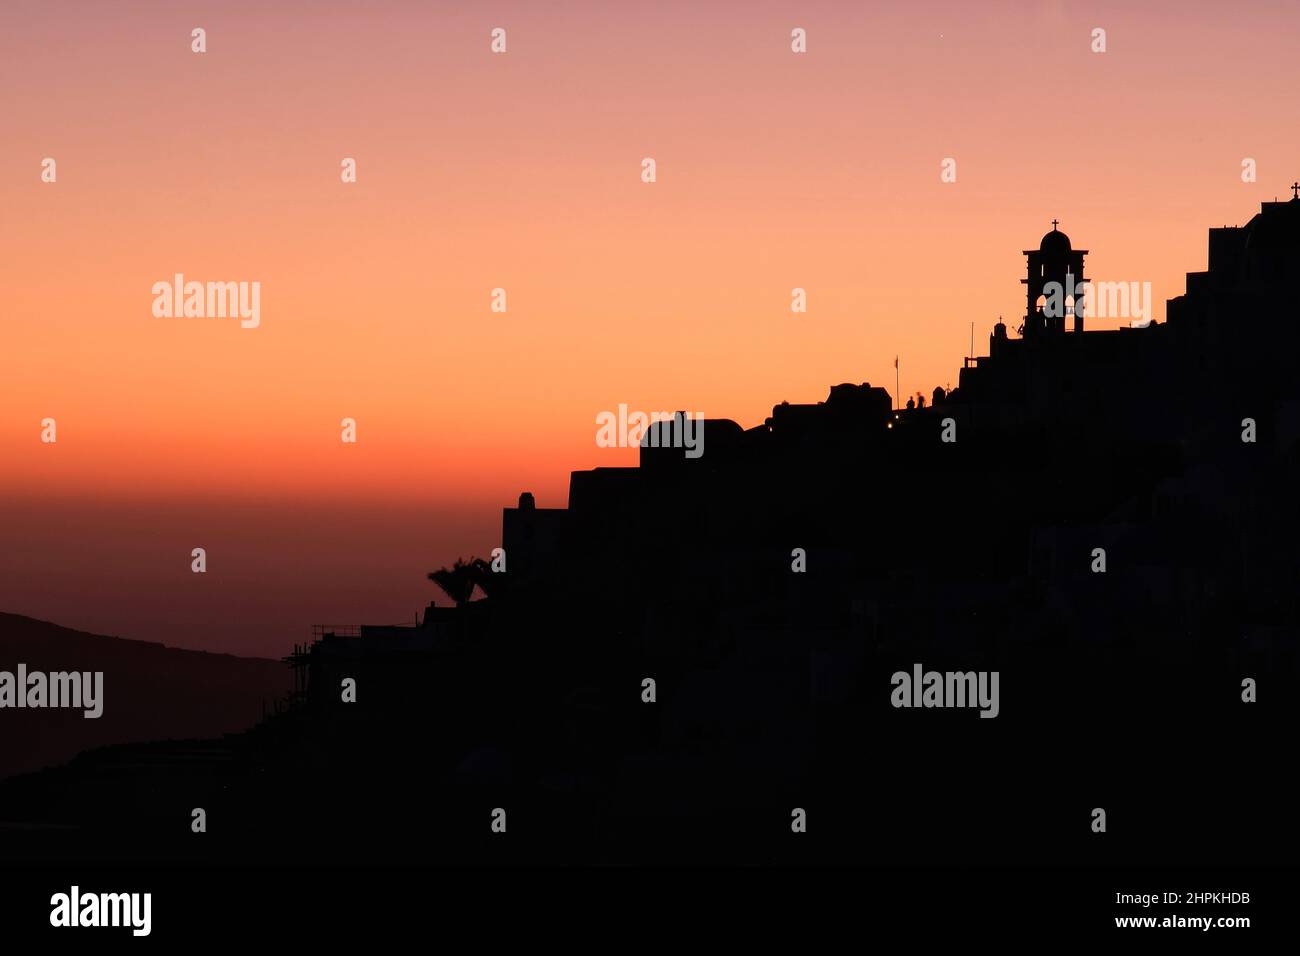 Amazing golden sunset and silhouette view of  churches and the village of Imerovigli in Santorini Stock Photo